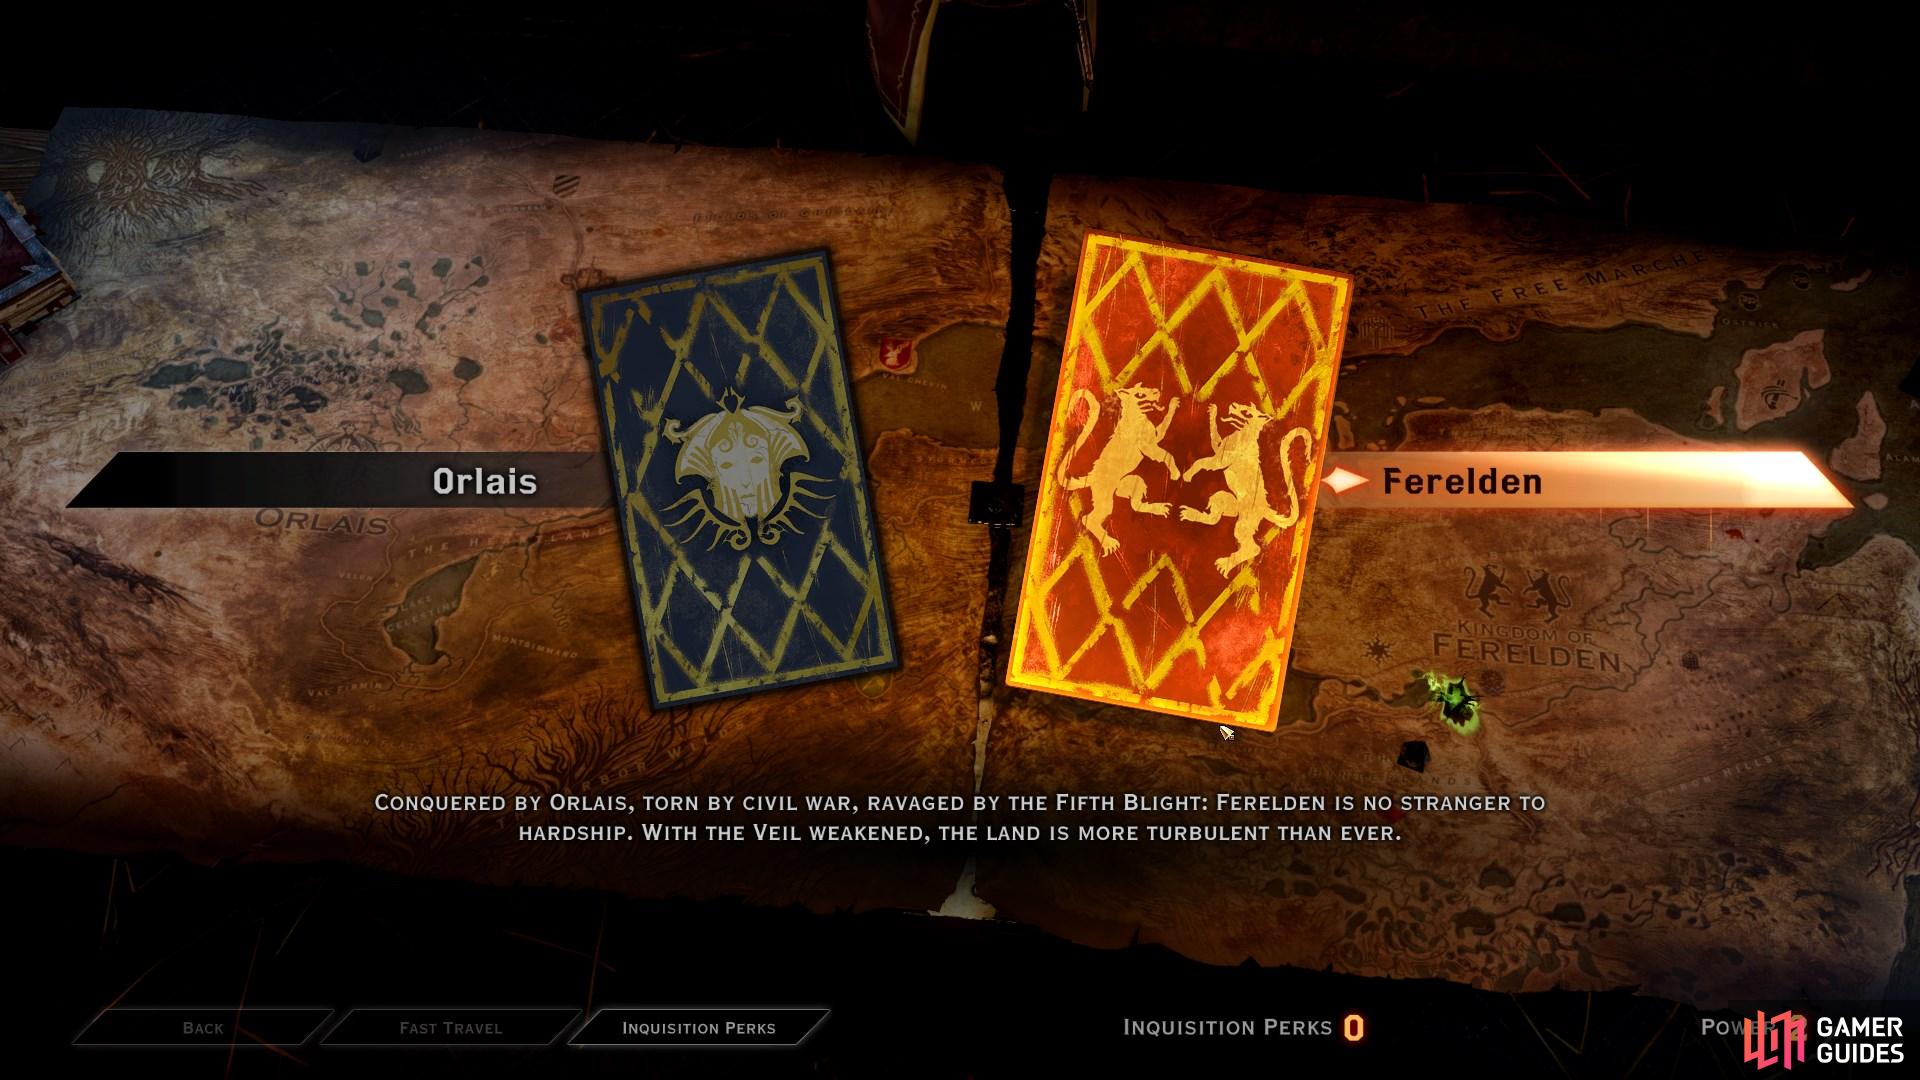 When you visit the War Table, you can choose between two realms - Orlais and Ferelden - to complete missions within.